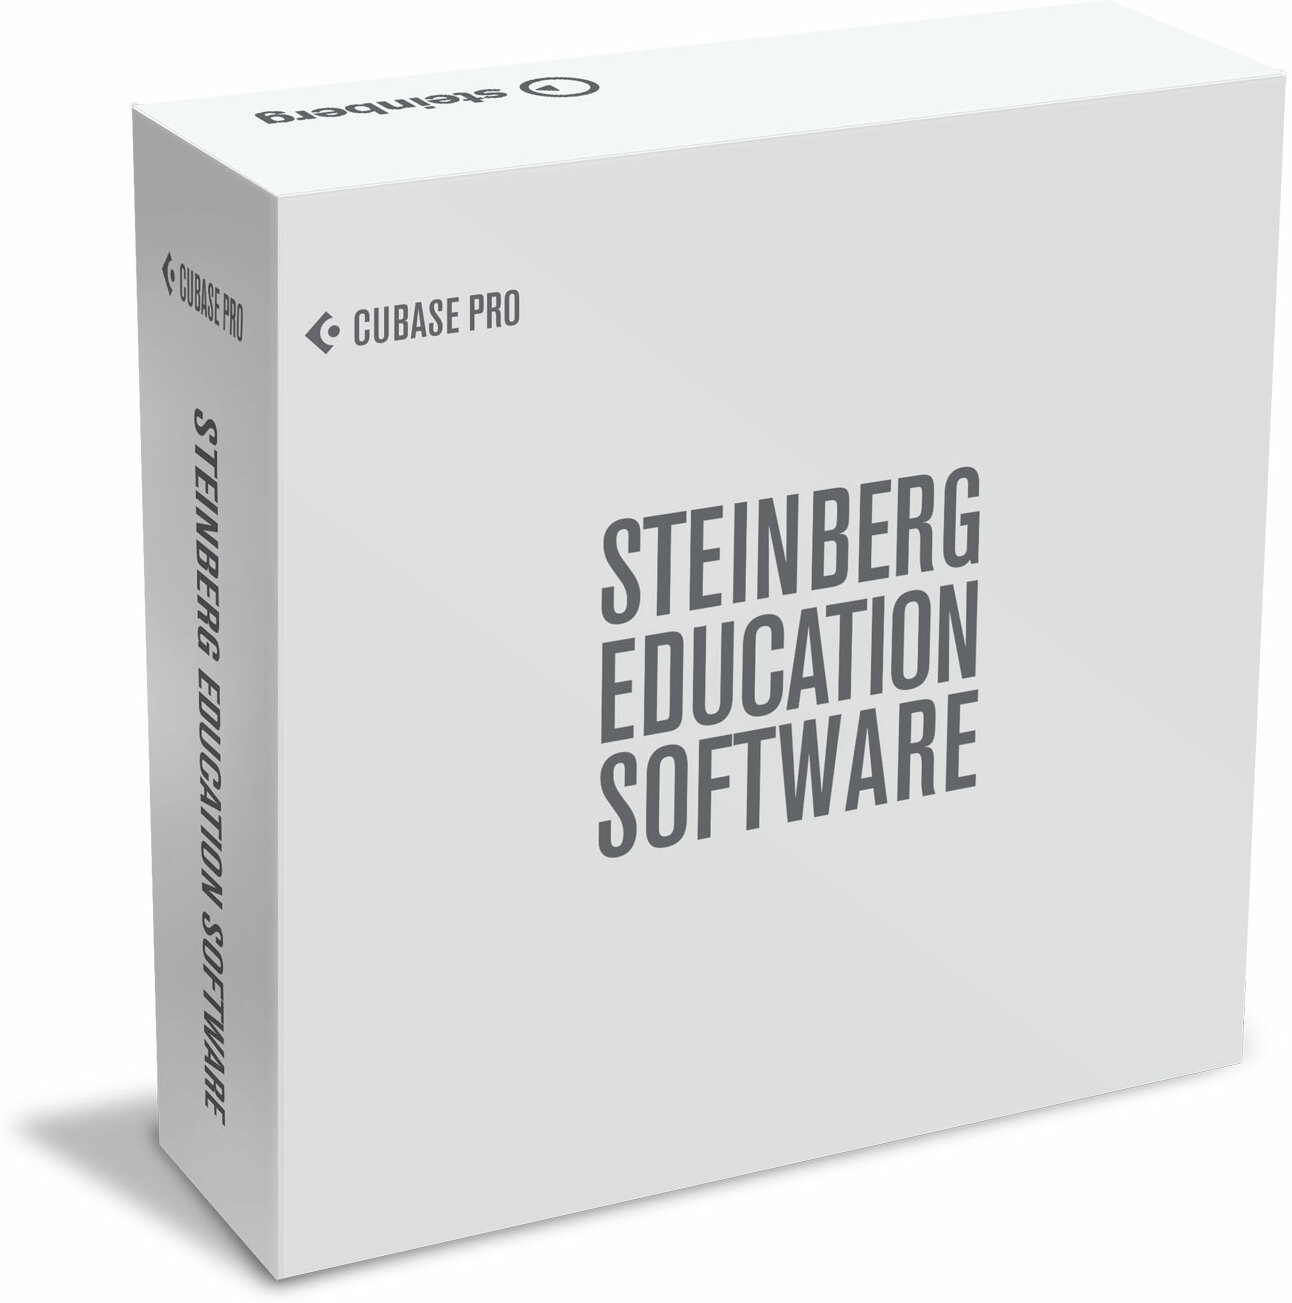 Steinberg Cubase Pro 10.5 Education - Sequenzer Software - Main picture